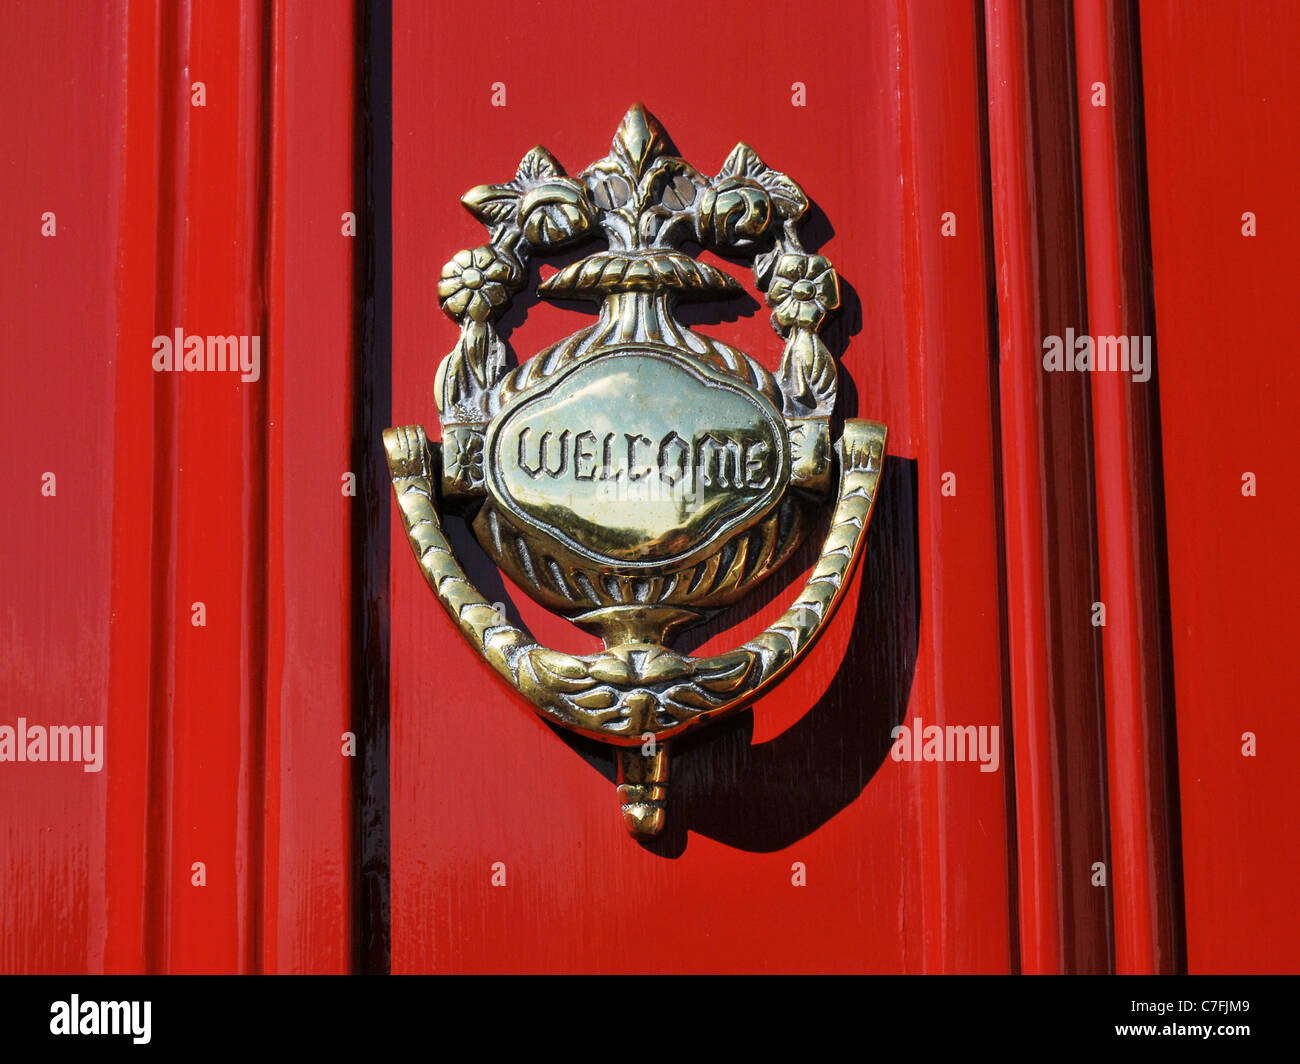 A brass Welcome knocker on a red door Stock Photo